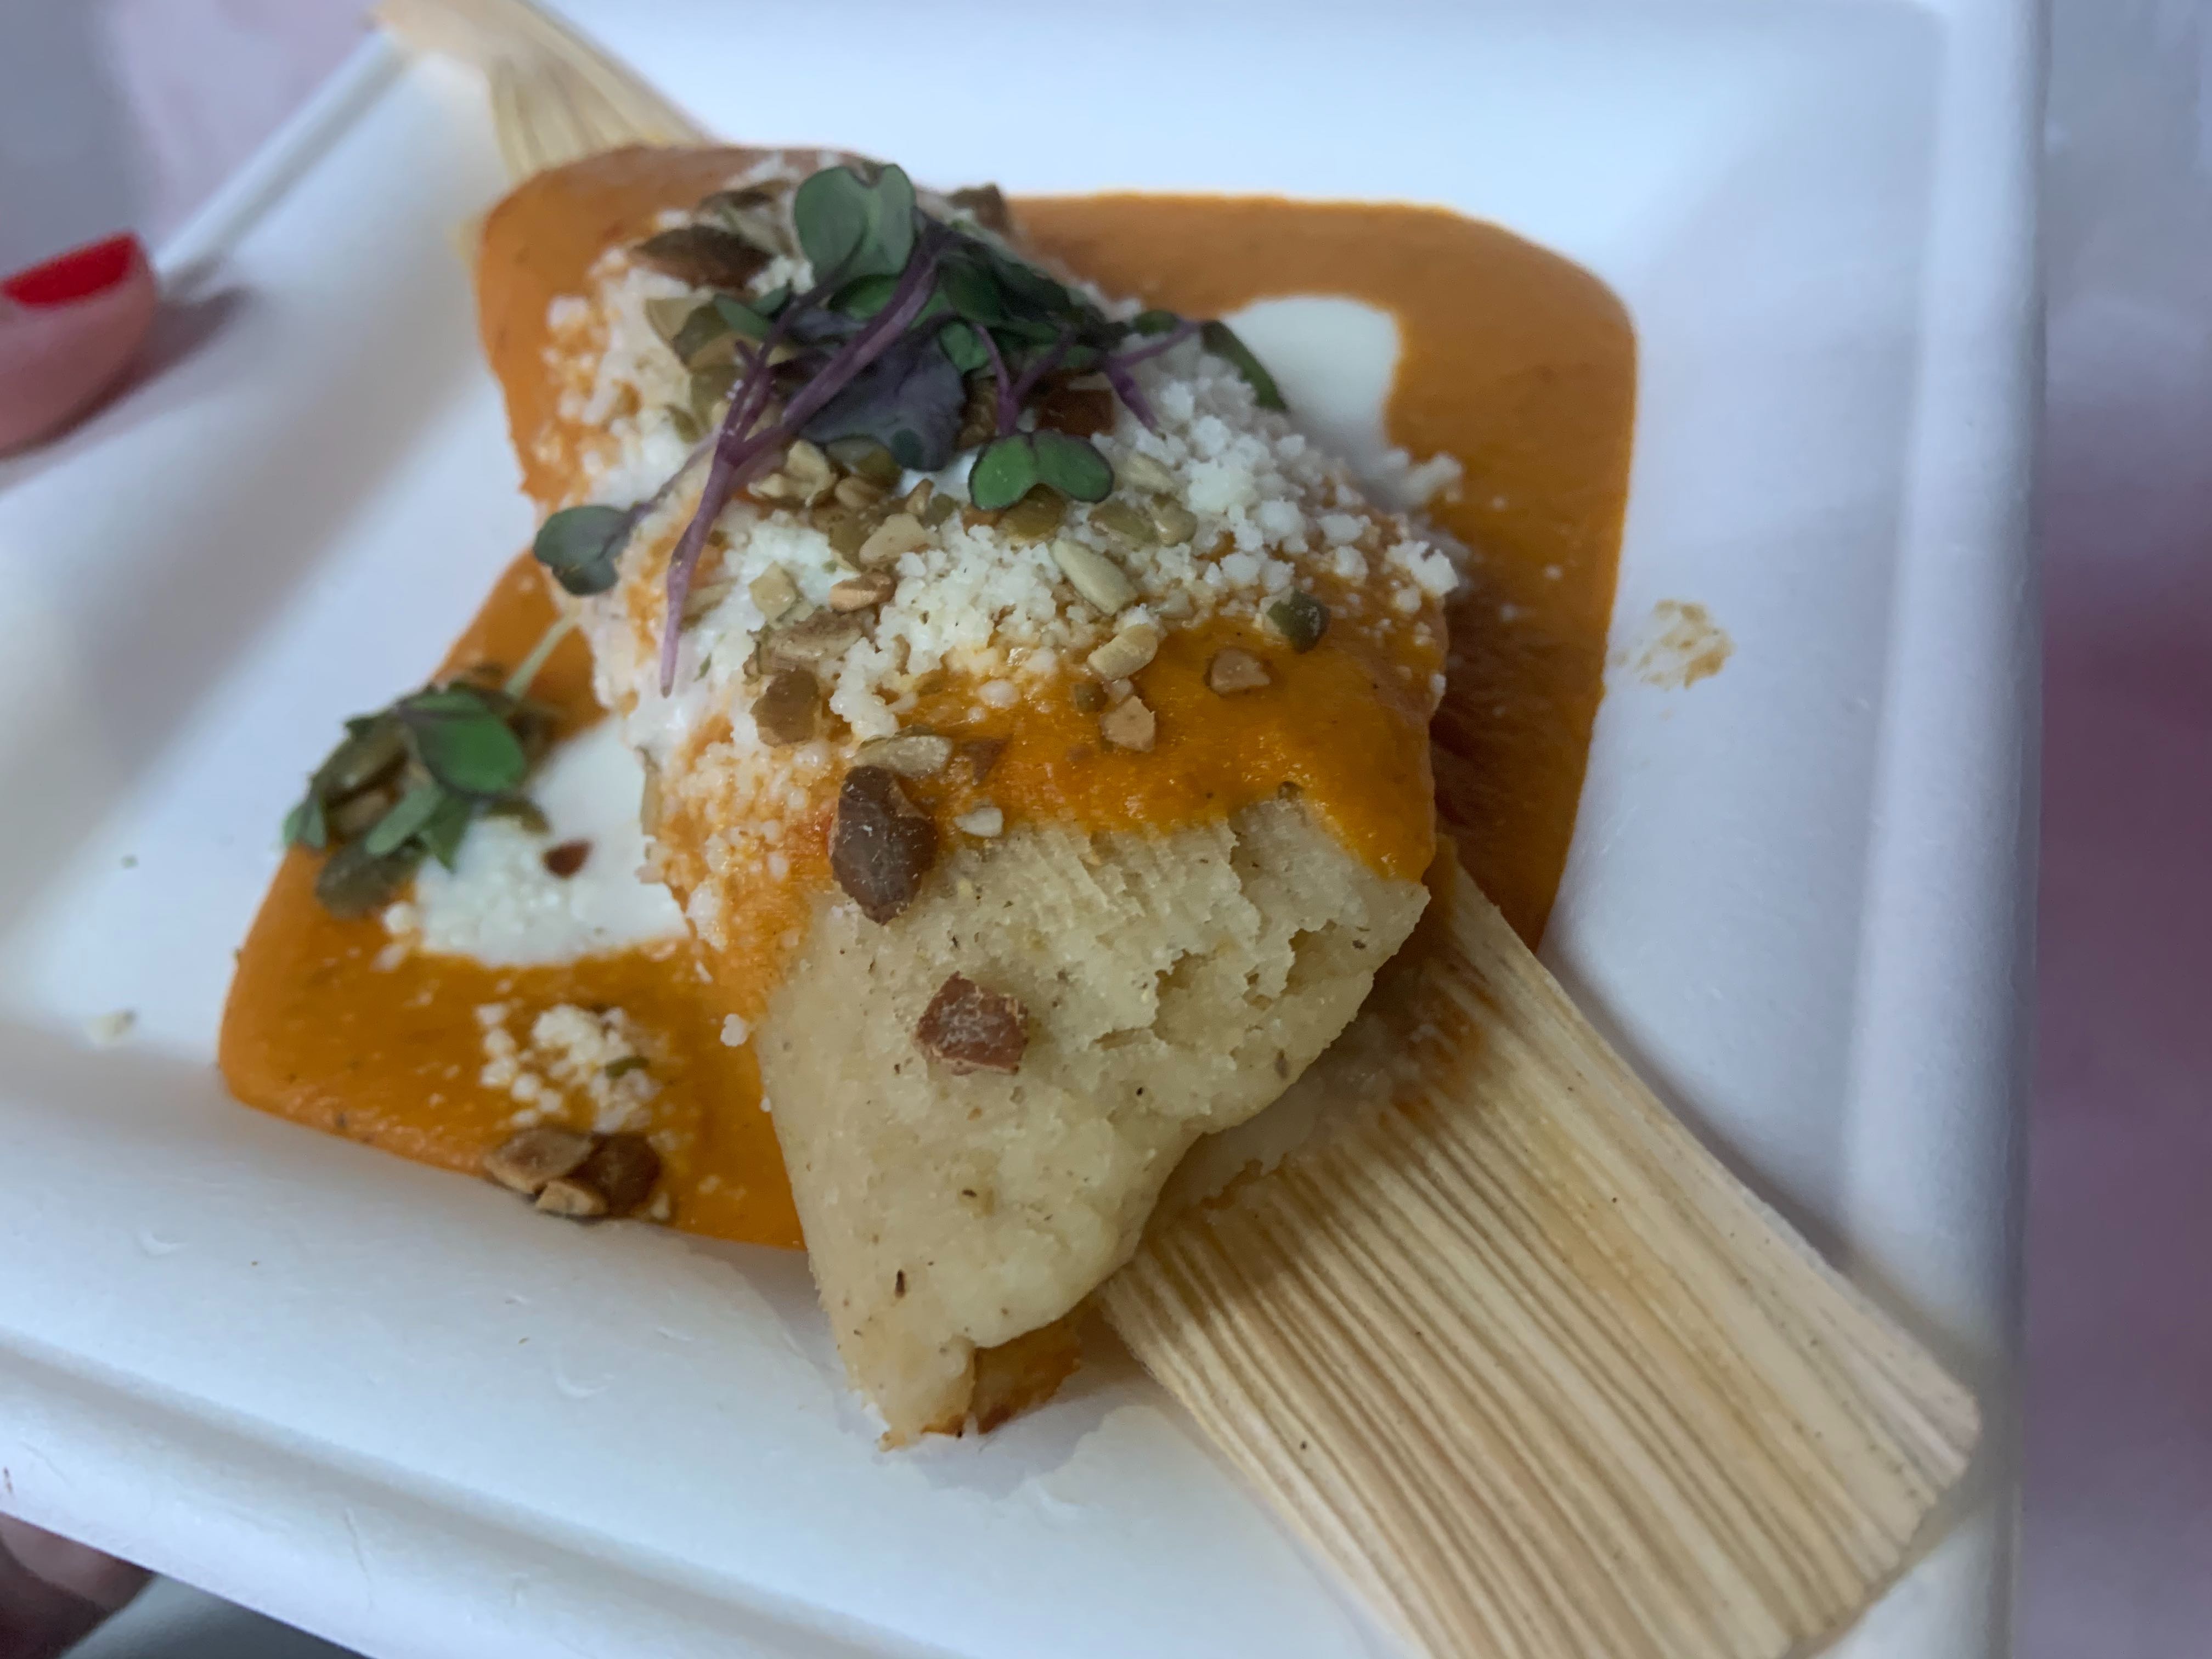 *NEW* Tamal de Pollo: Braised Chipotle Chicken served in a Corn Masa with Yellow Mole and topped with Toasted Pumpkin Seeds, Queso Cotija and Crema Mexicana – $6.75